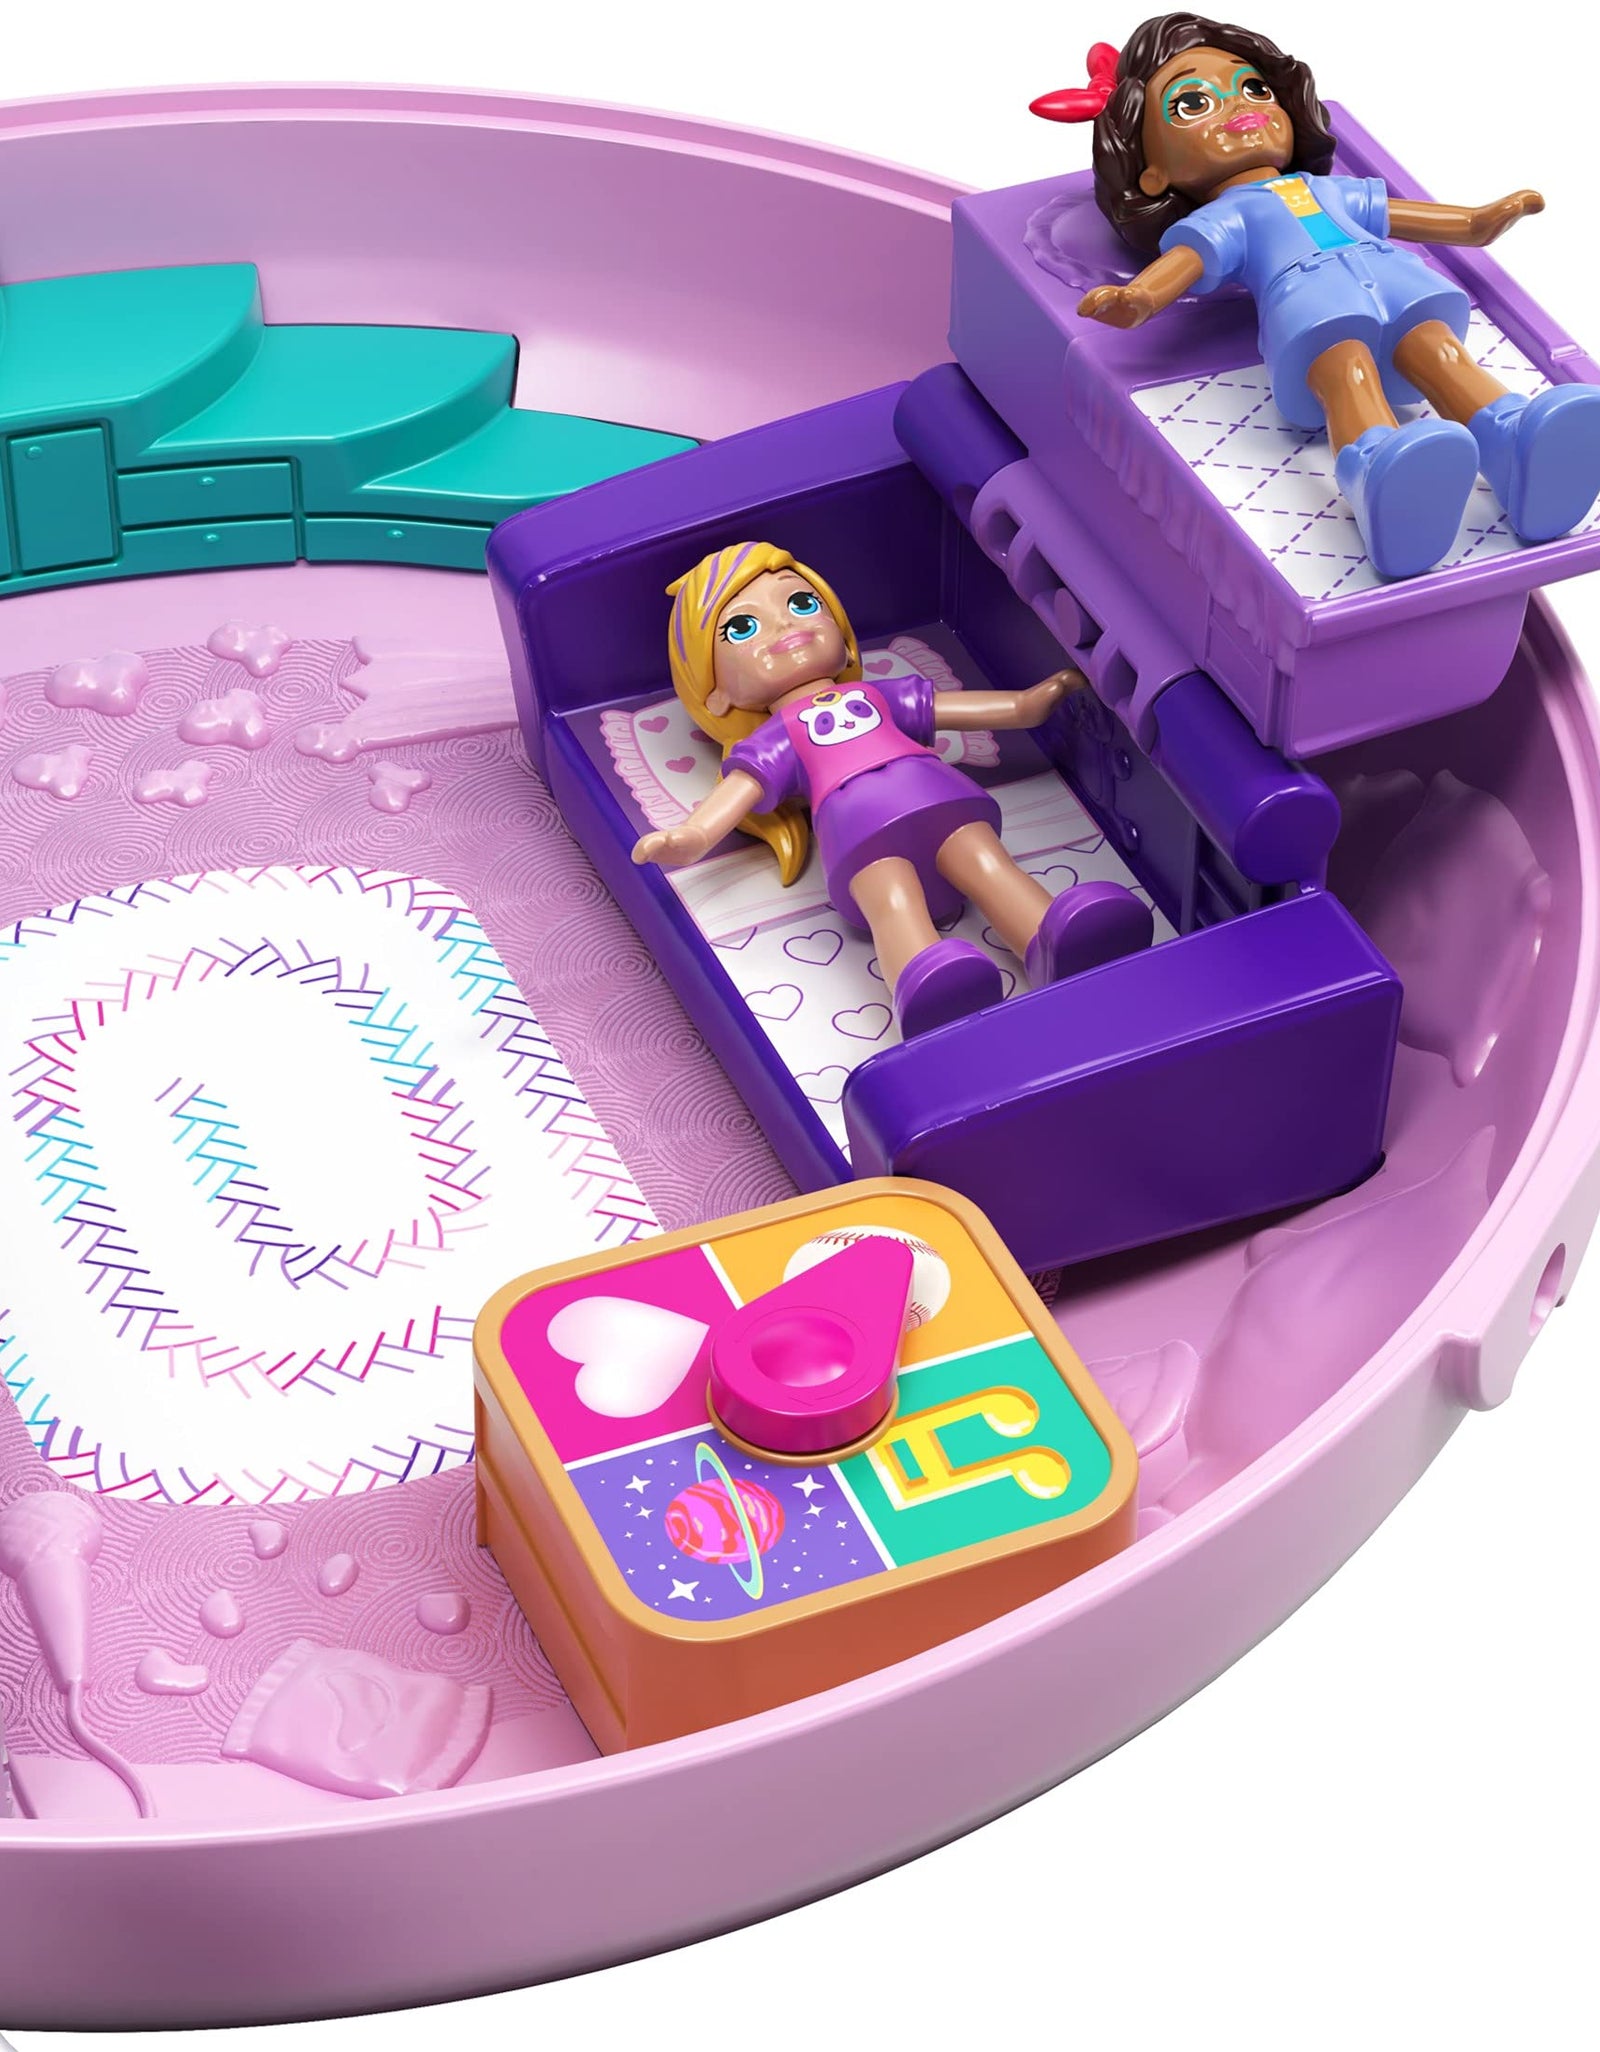 Polly Pocket Pocket World Donut Pajama Party Compact with Donut Shape, Polly’s Living Room World, Surprise Reveals, Micro Polly and Shani Dolls & Pizza Scooter Accessory [Amazon Exclusive]